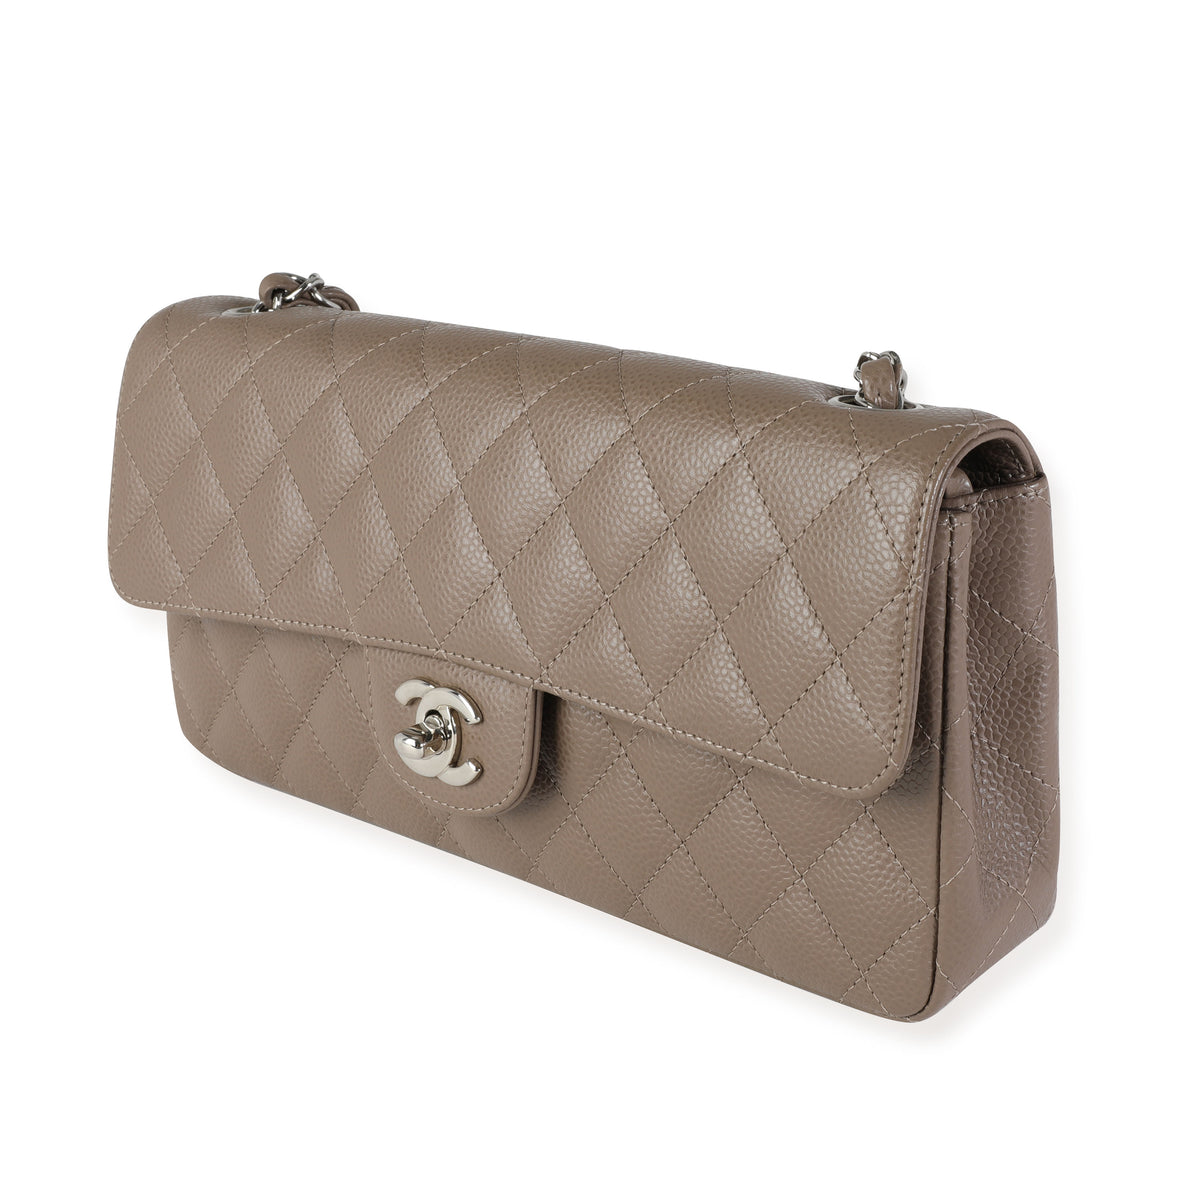 Chanel Evening Star Flap Bag Quilted Patent East West